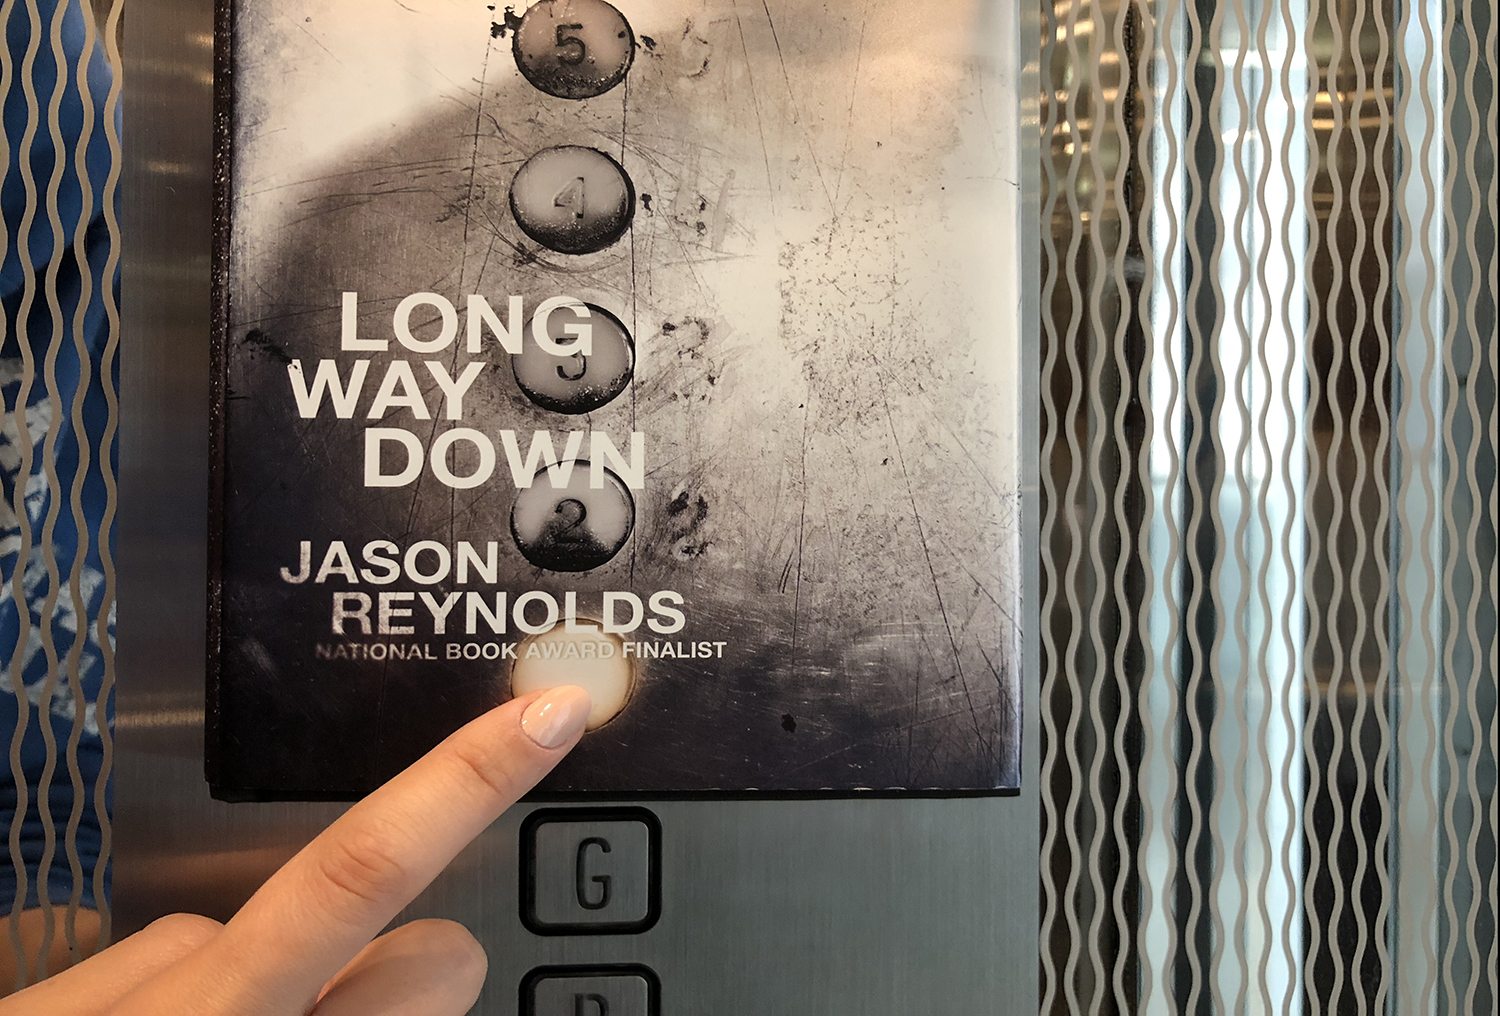 Long Way Down. Jason Reynolds wrote the story for A…